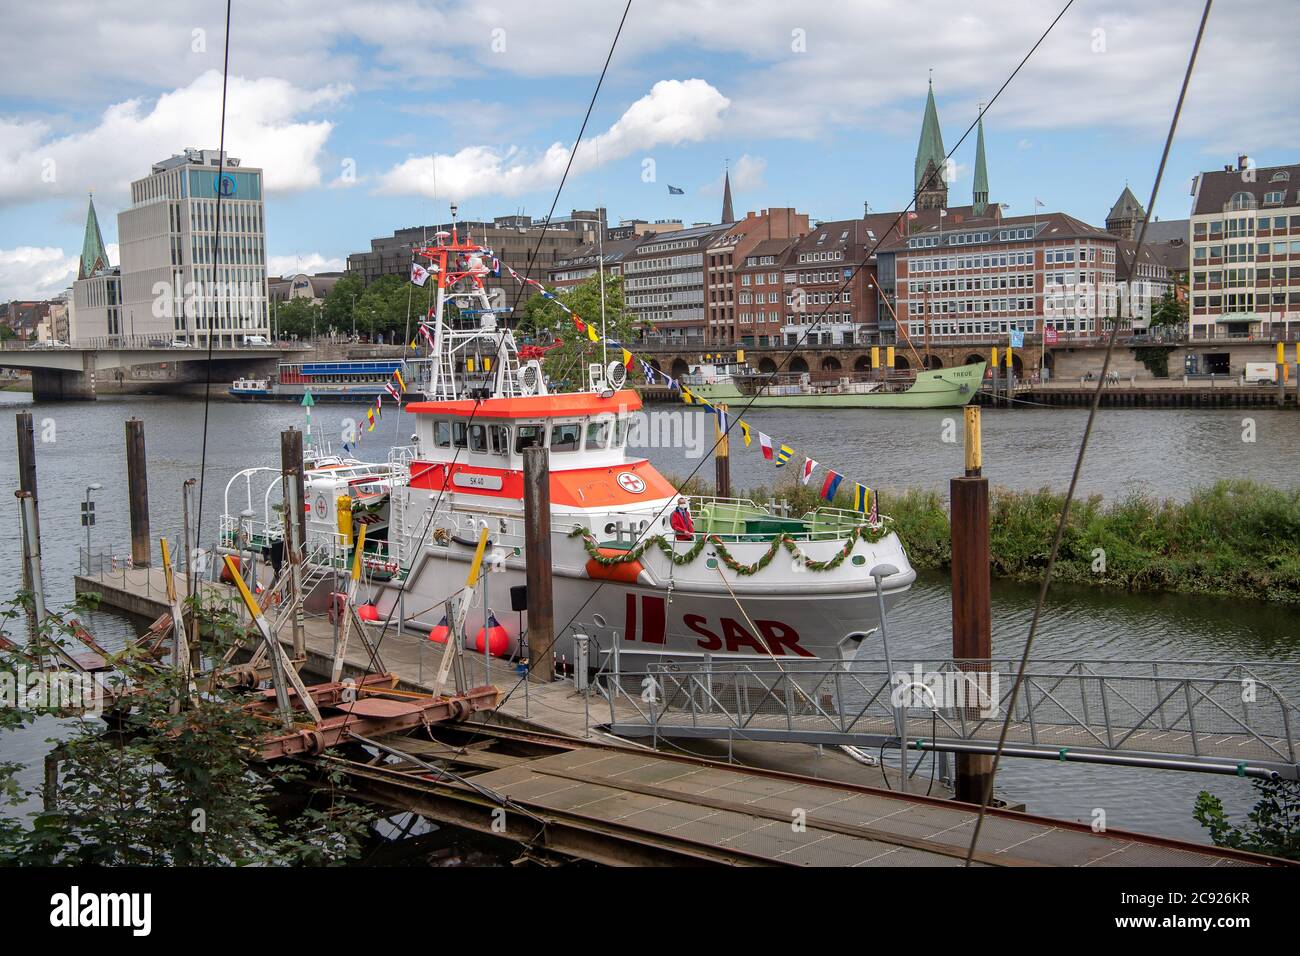 Bremen, Germany. 28th July, 2020. The new sea rescue cruiser "Hamburg" of  the Deutsche Gesellschaft zur Rettung Schiffbrüchiger (DGzRS) lies in front  of the christening ceremony at the pier. The ship should